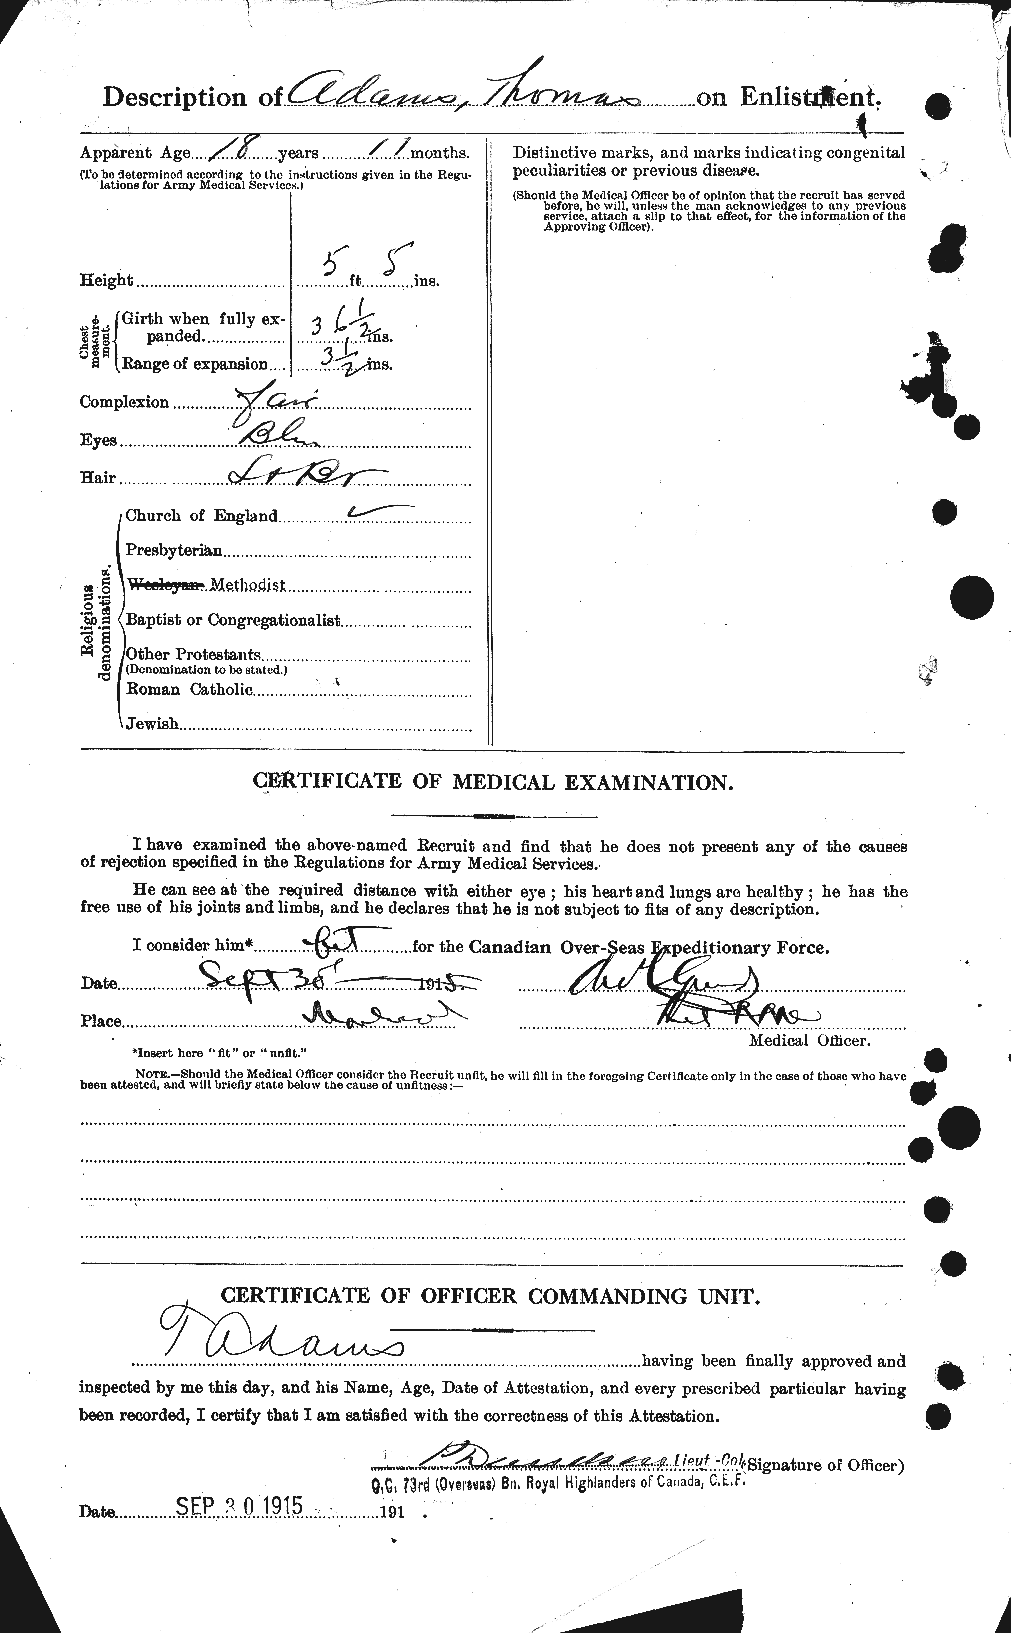 Personnel Records of the First World War - CEF 202161b